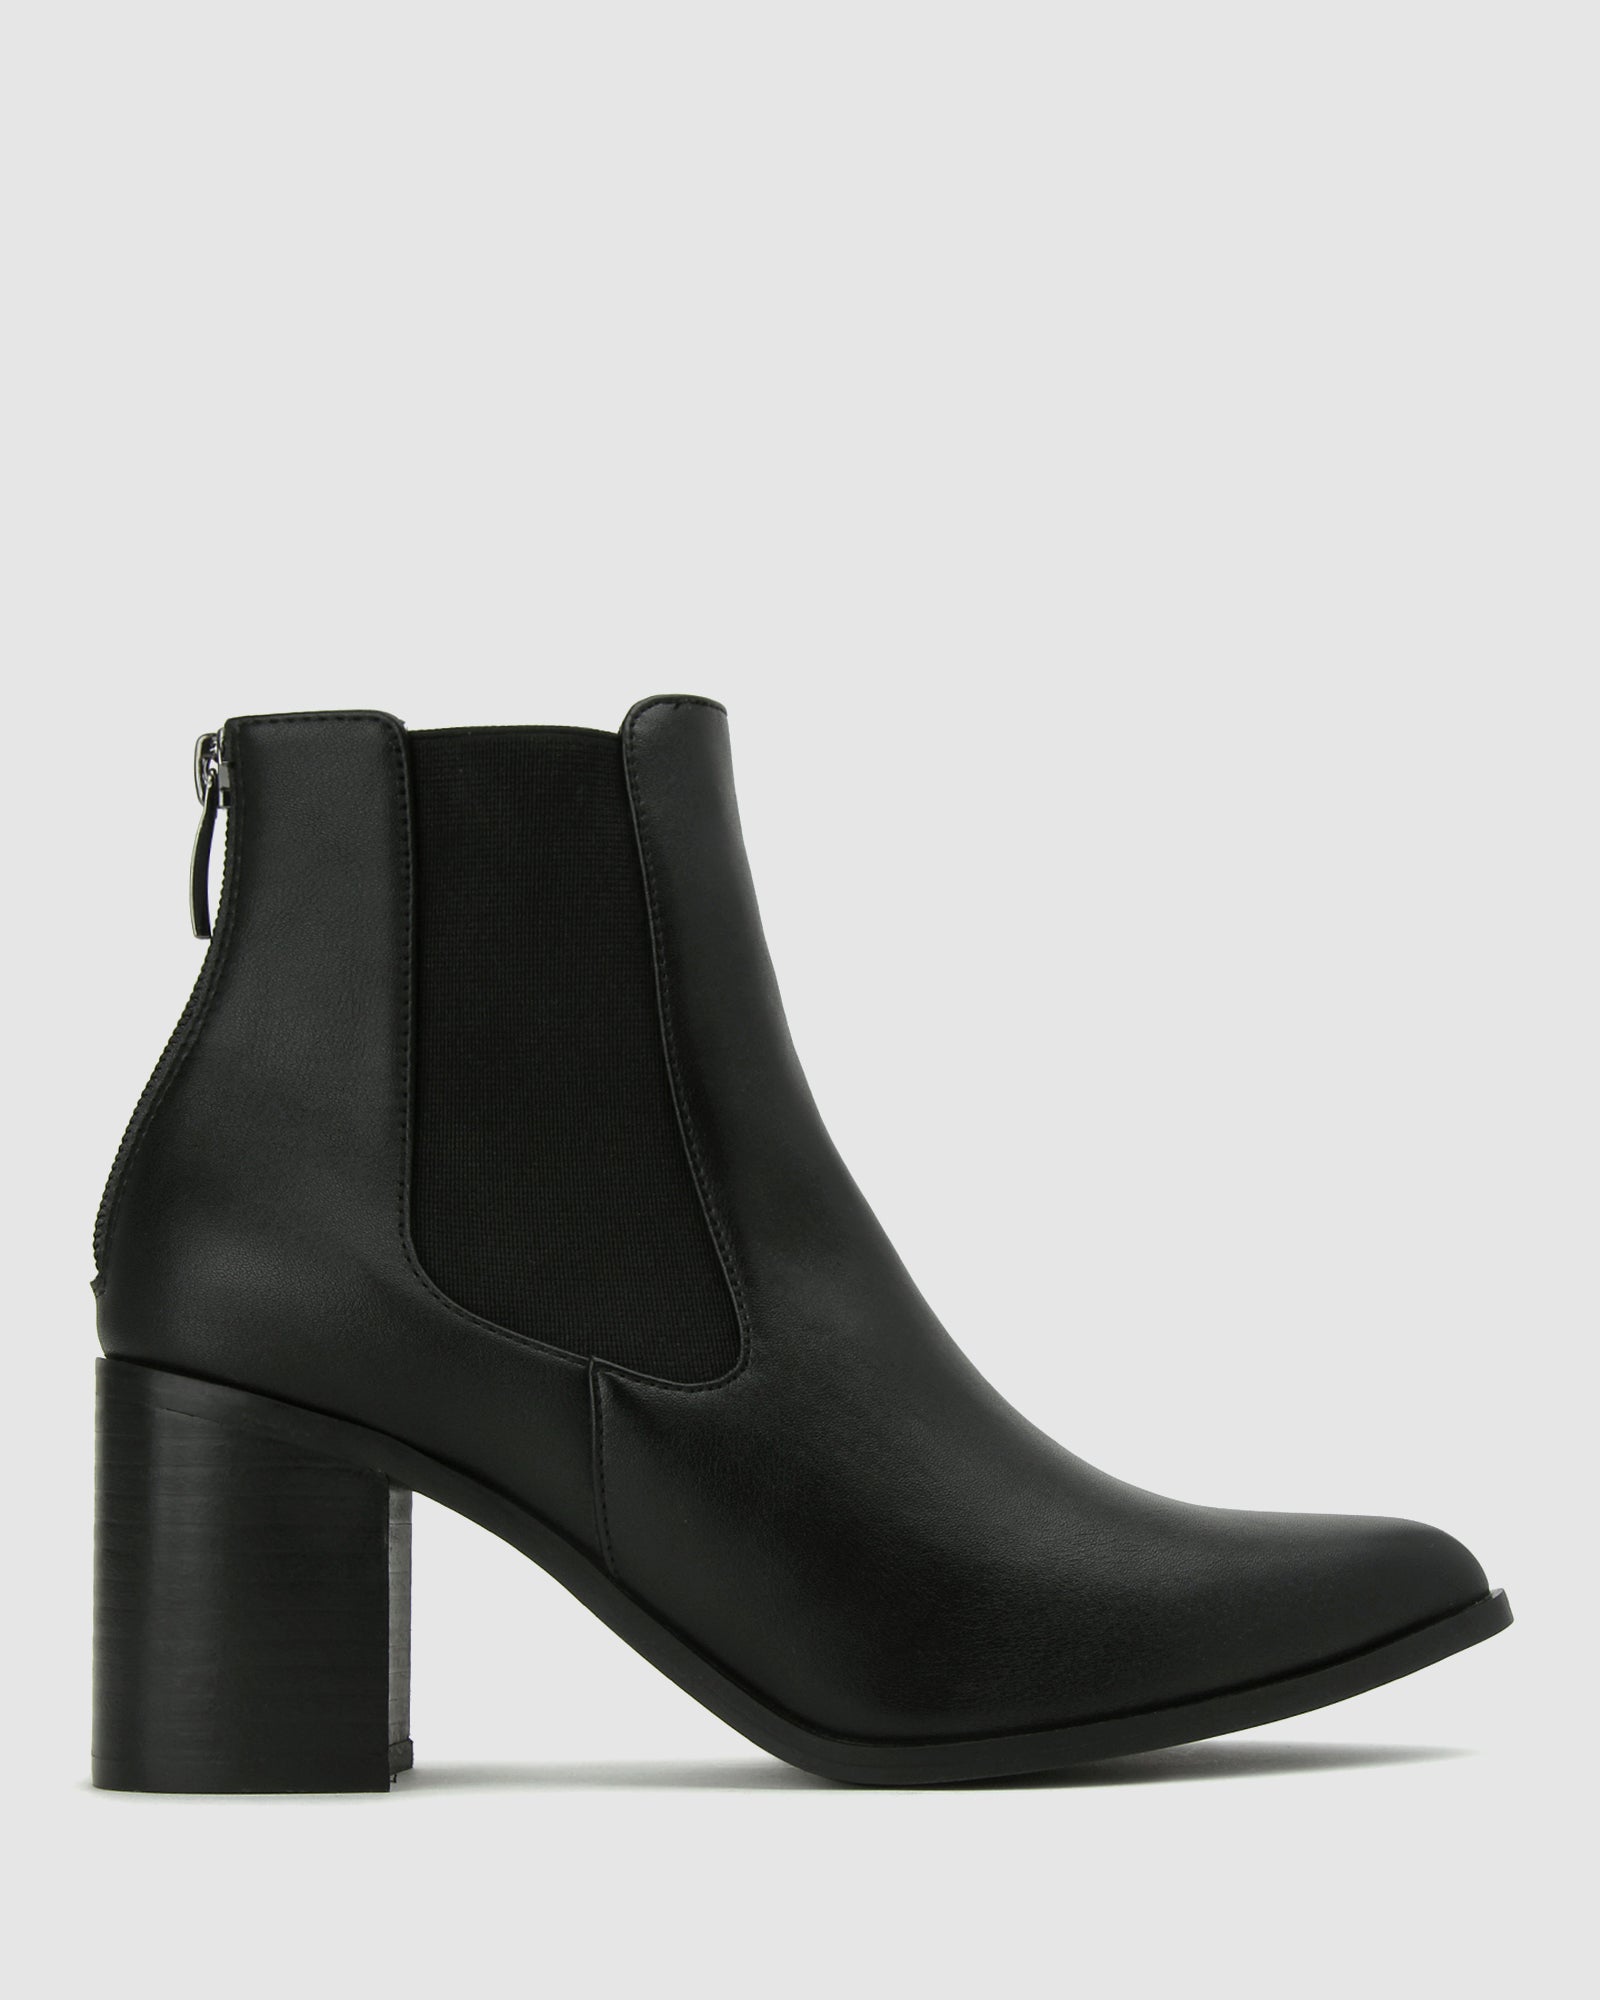 Buy SOPHIE Pointed Toe Ankle Boots by Betts online - Betts